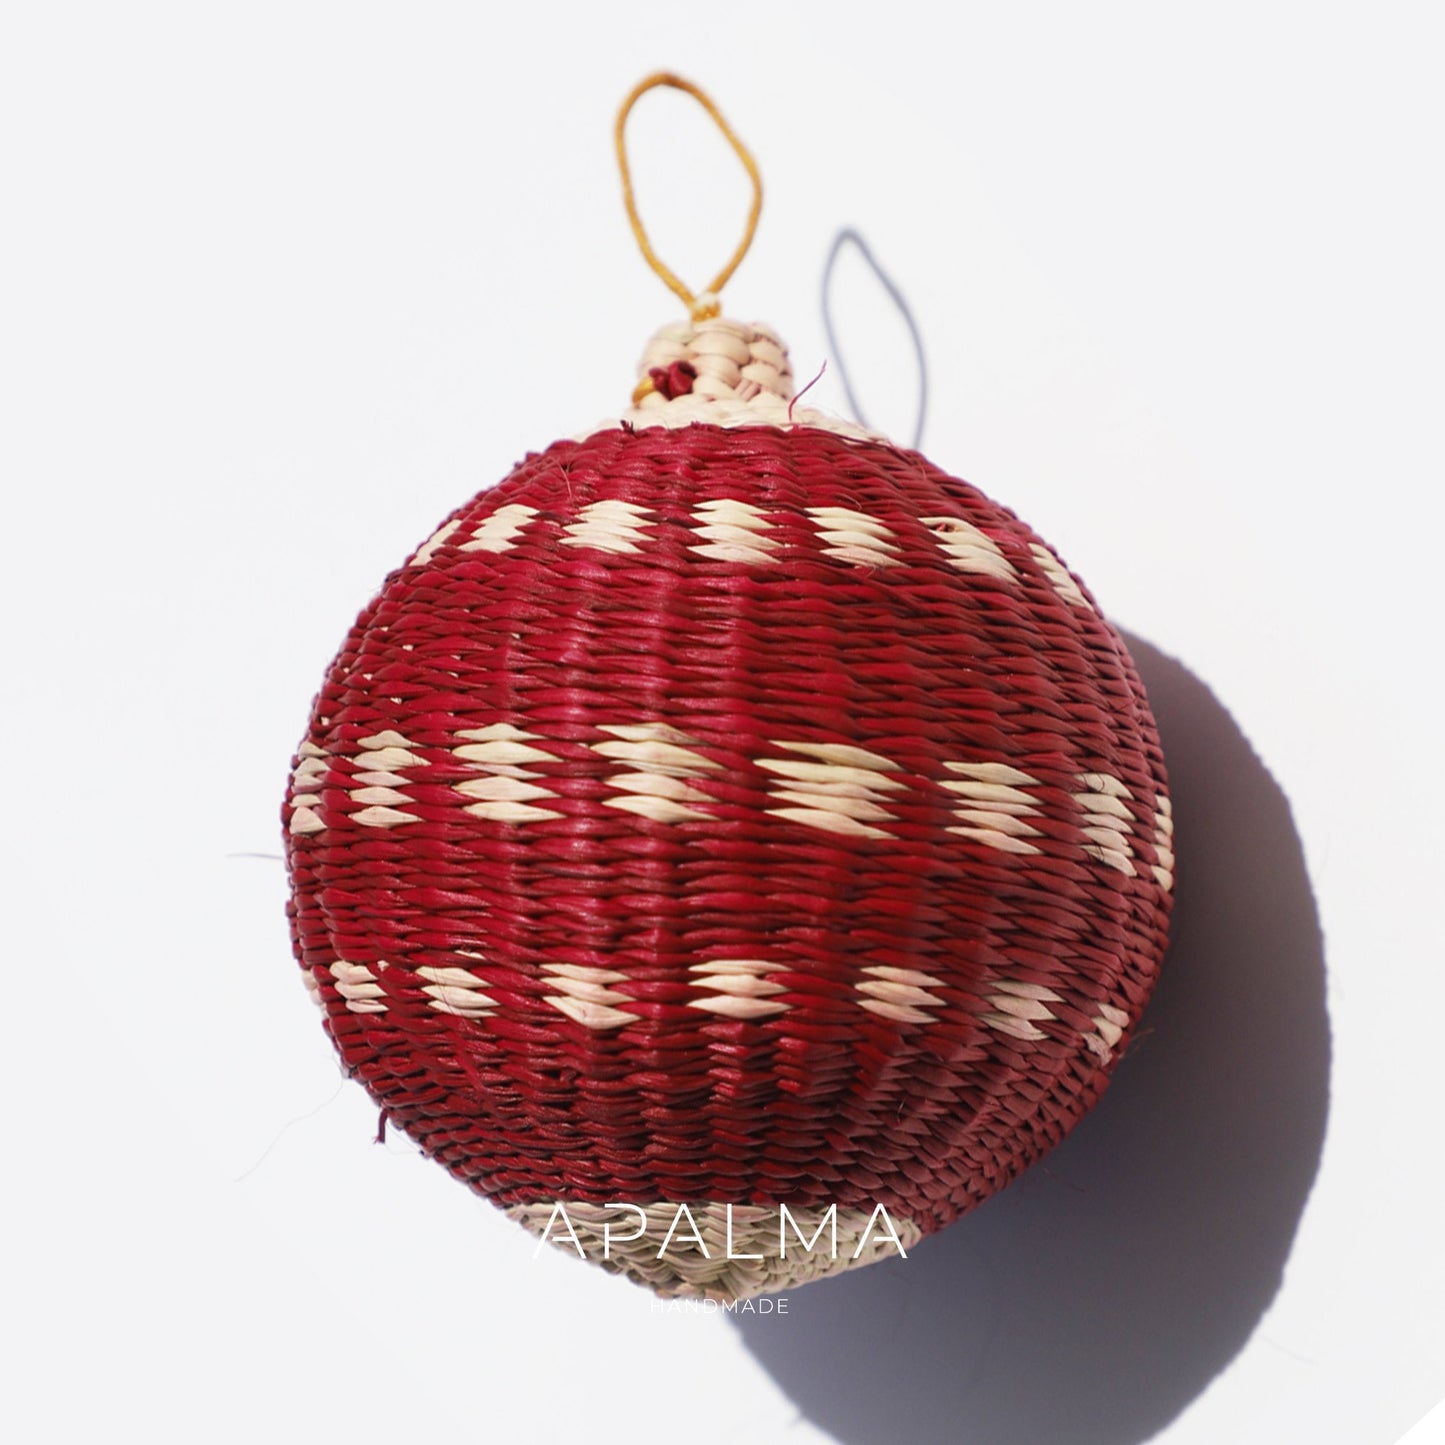 Red Christmas Baubles / Balls / Ornaments - Handmade in Iraca Palm 3" Diameter